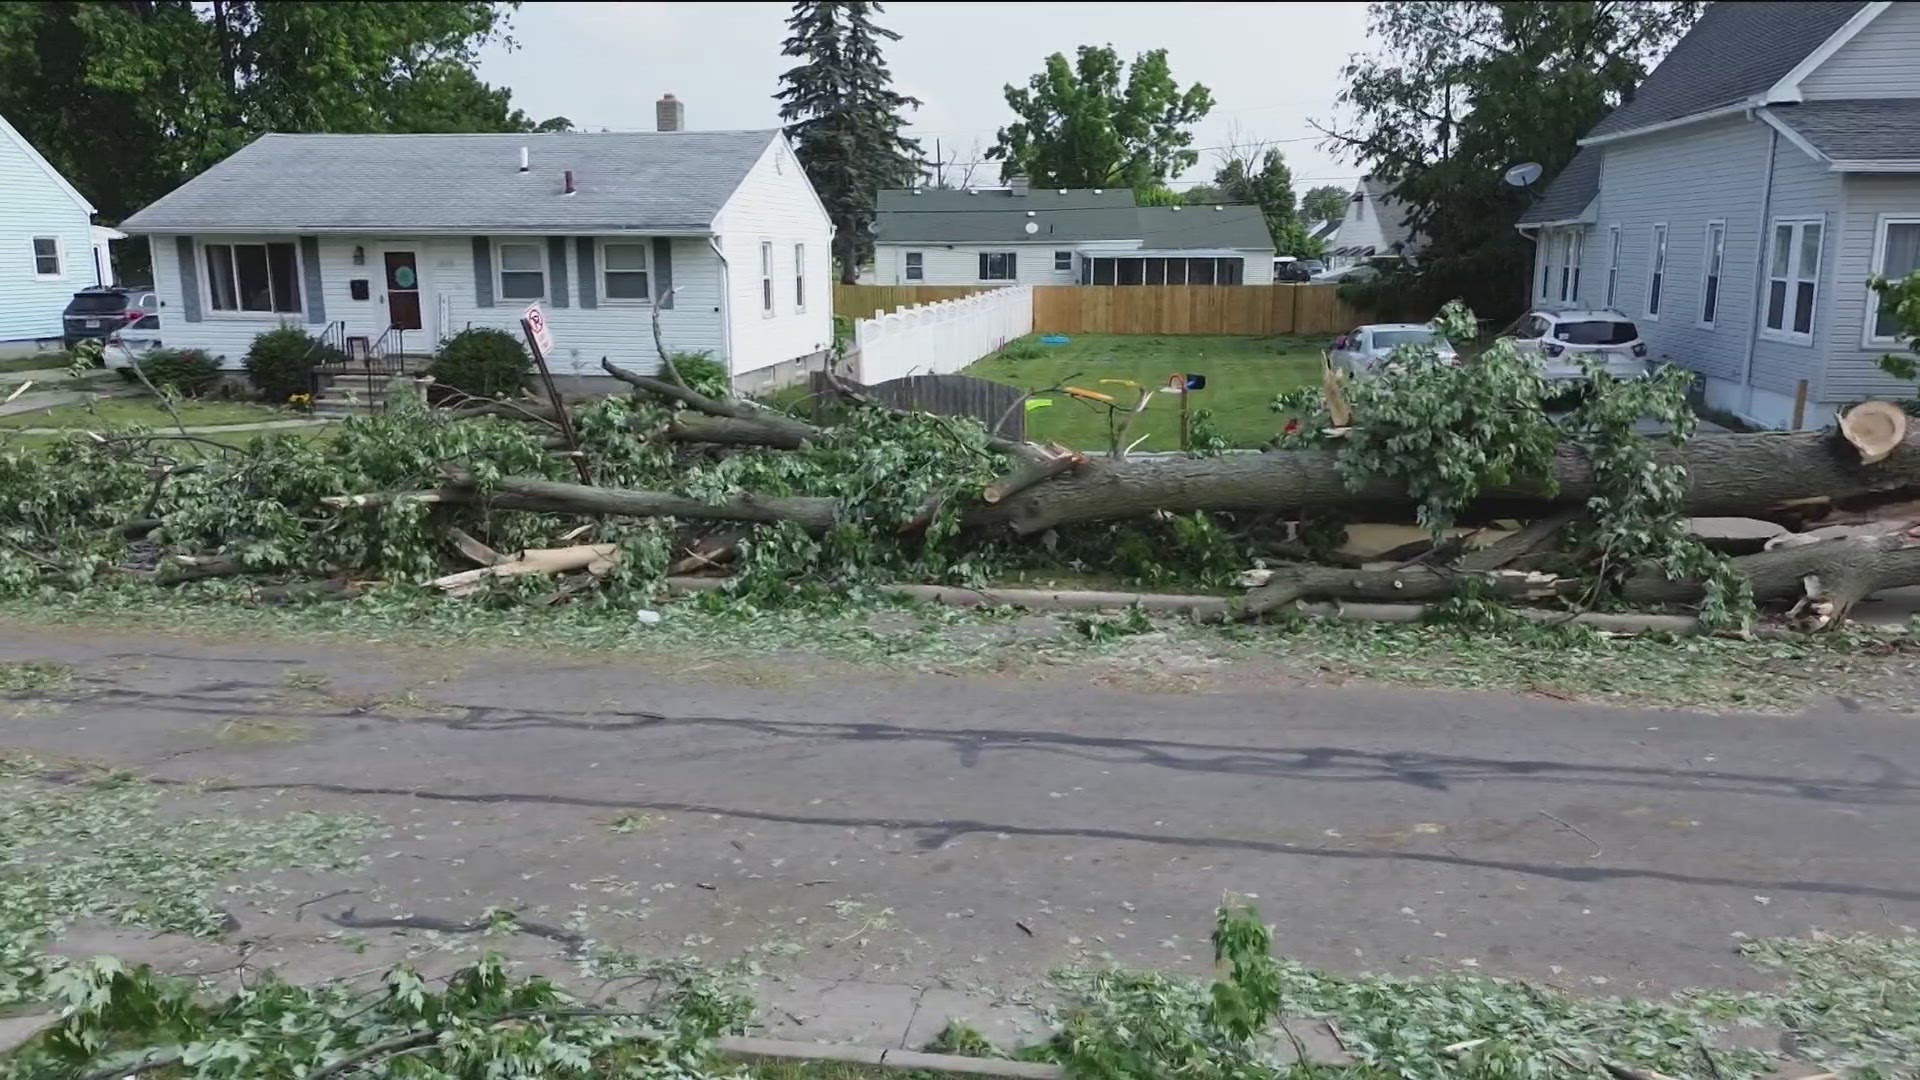 June 15 marks one year since an EF-2 tornado touched down in Point Place. There were no fatalities, but the damage was so extensive that some are still cleaning up.